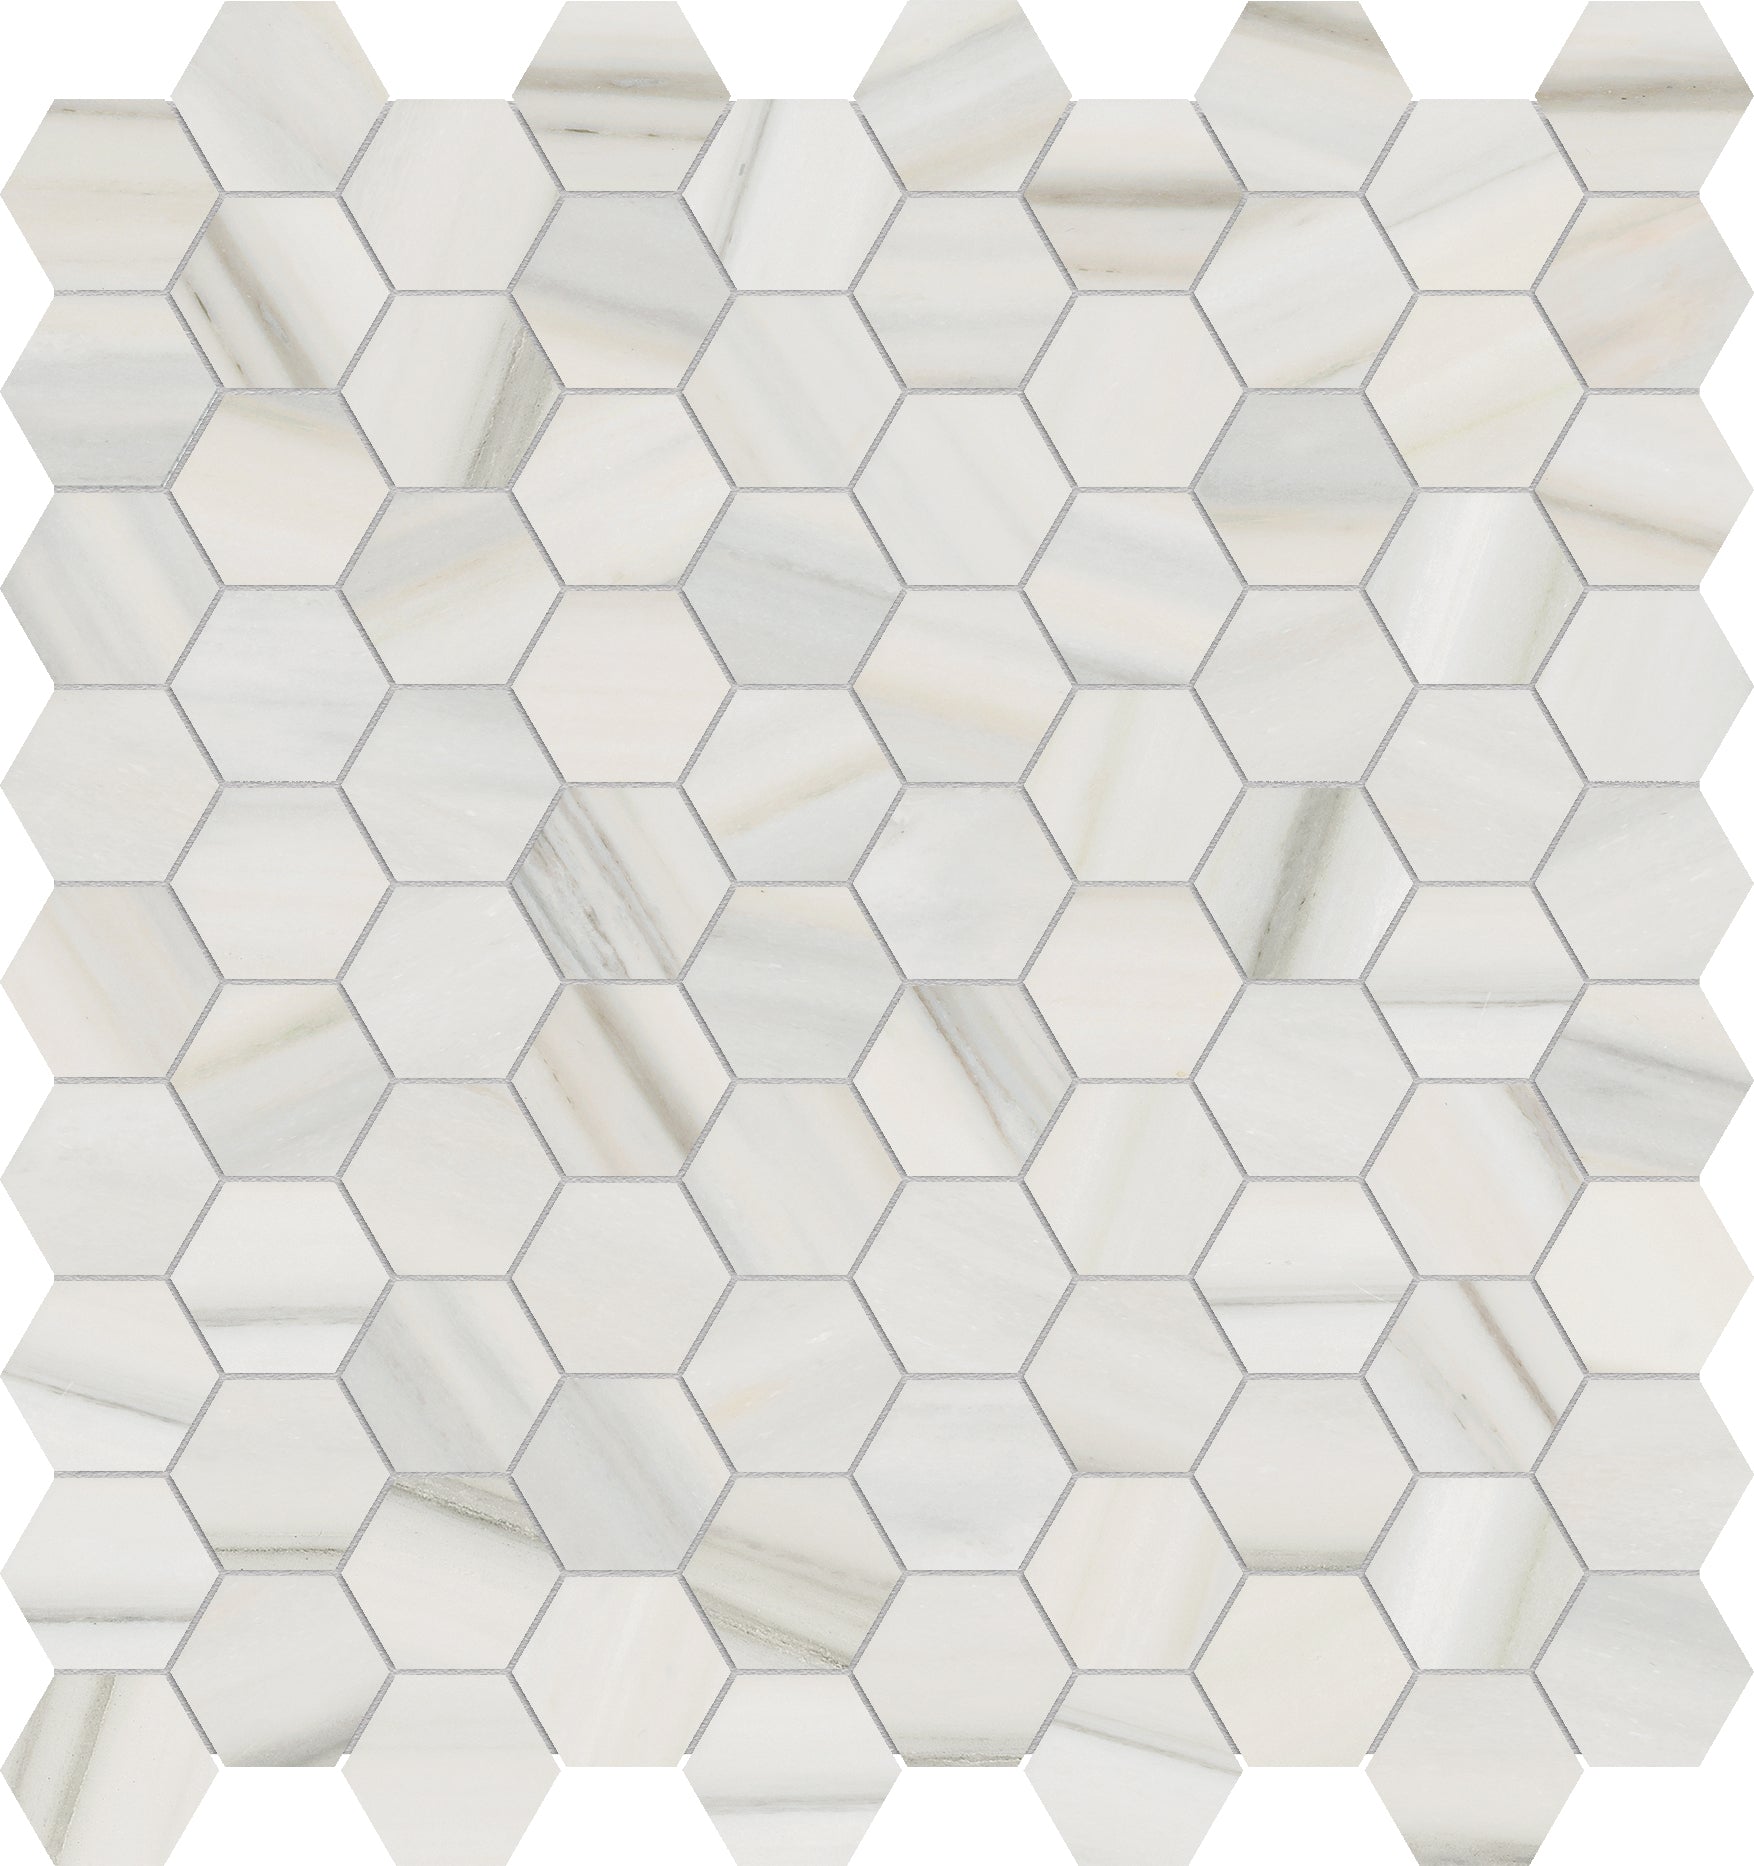 zebrino hexagon 1&25-inch pattern glazed porcelain mosaic from mayfair anatolia collection distributed by surface group international polished finish straight edge edge mesh shape